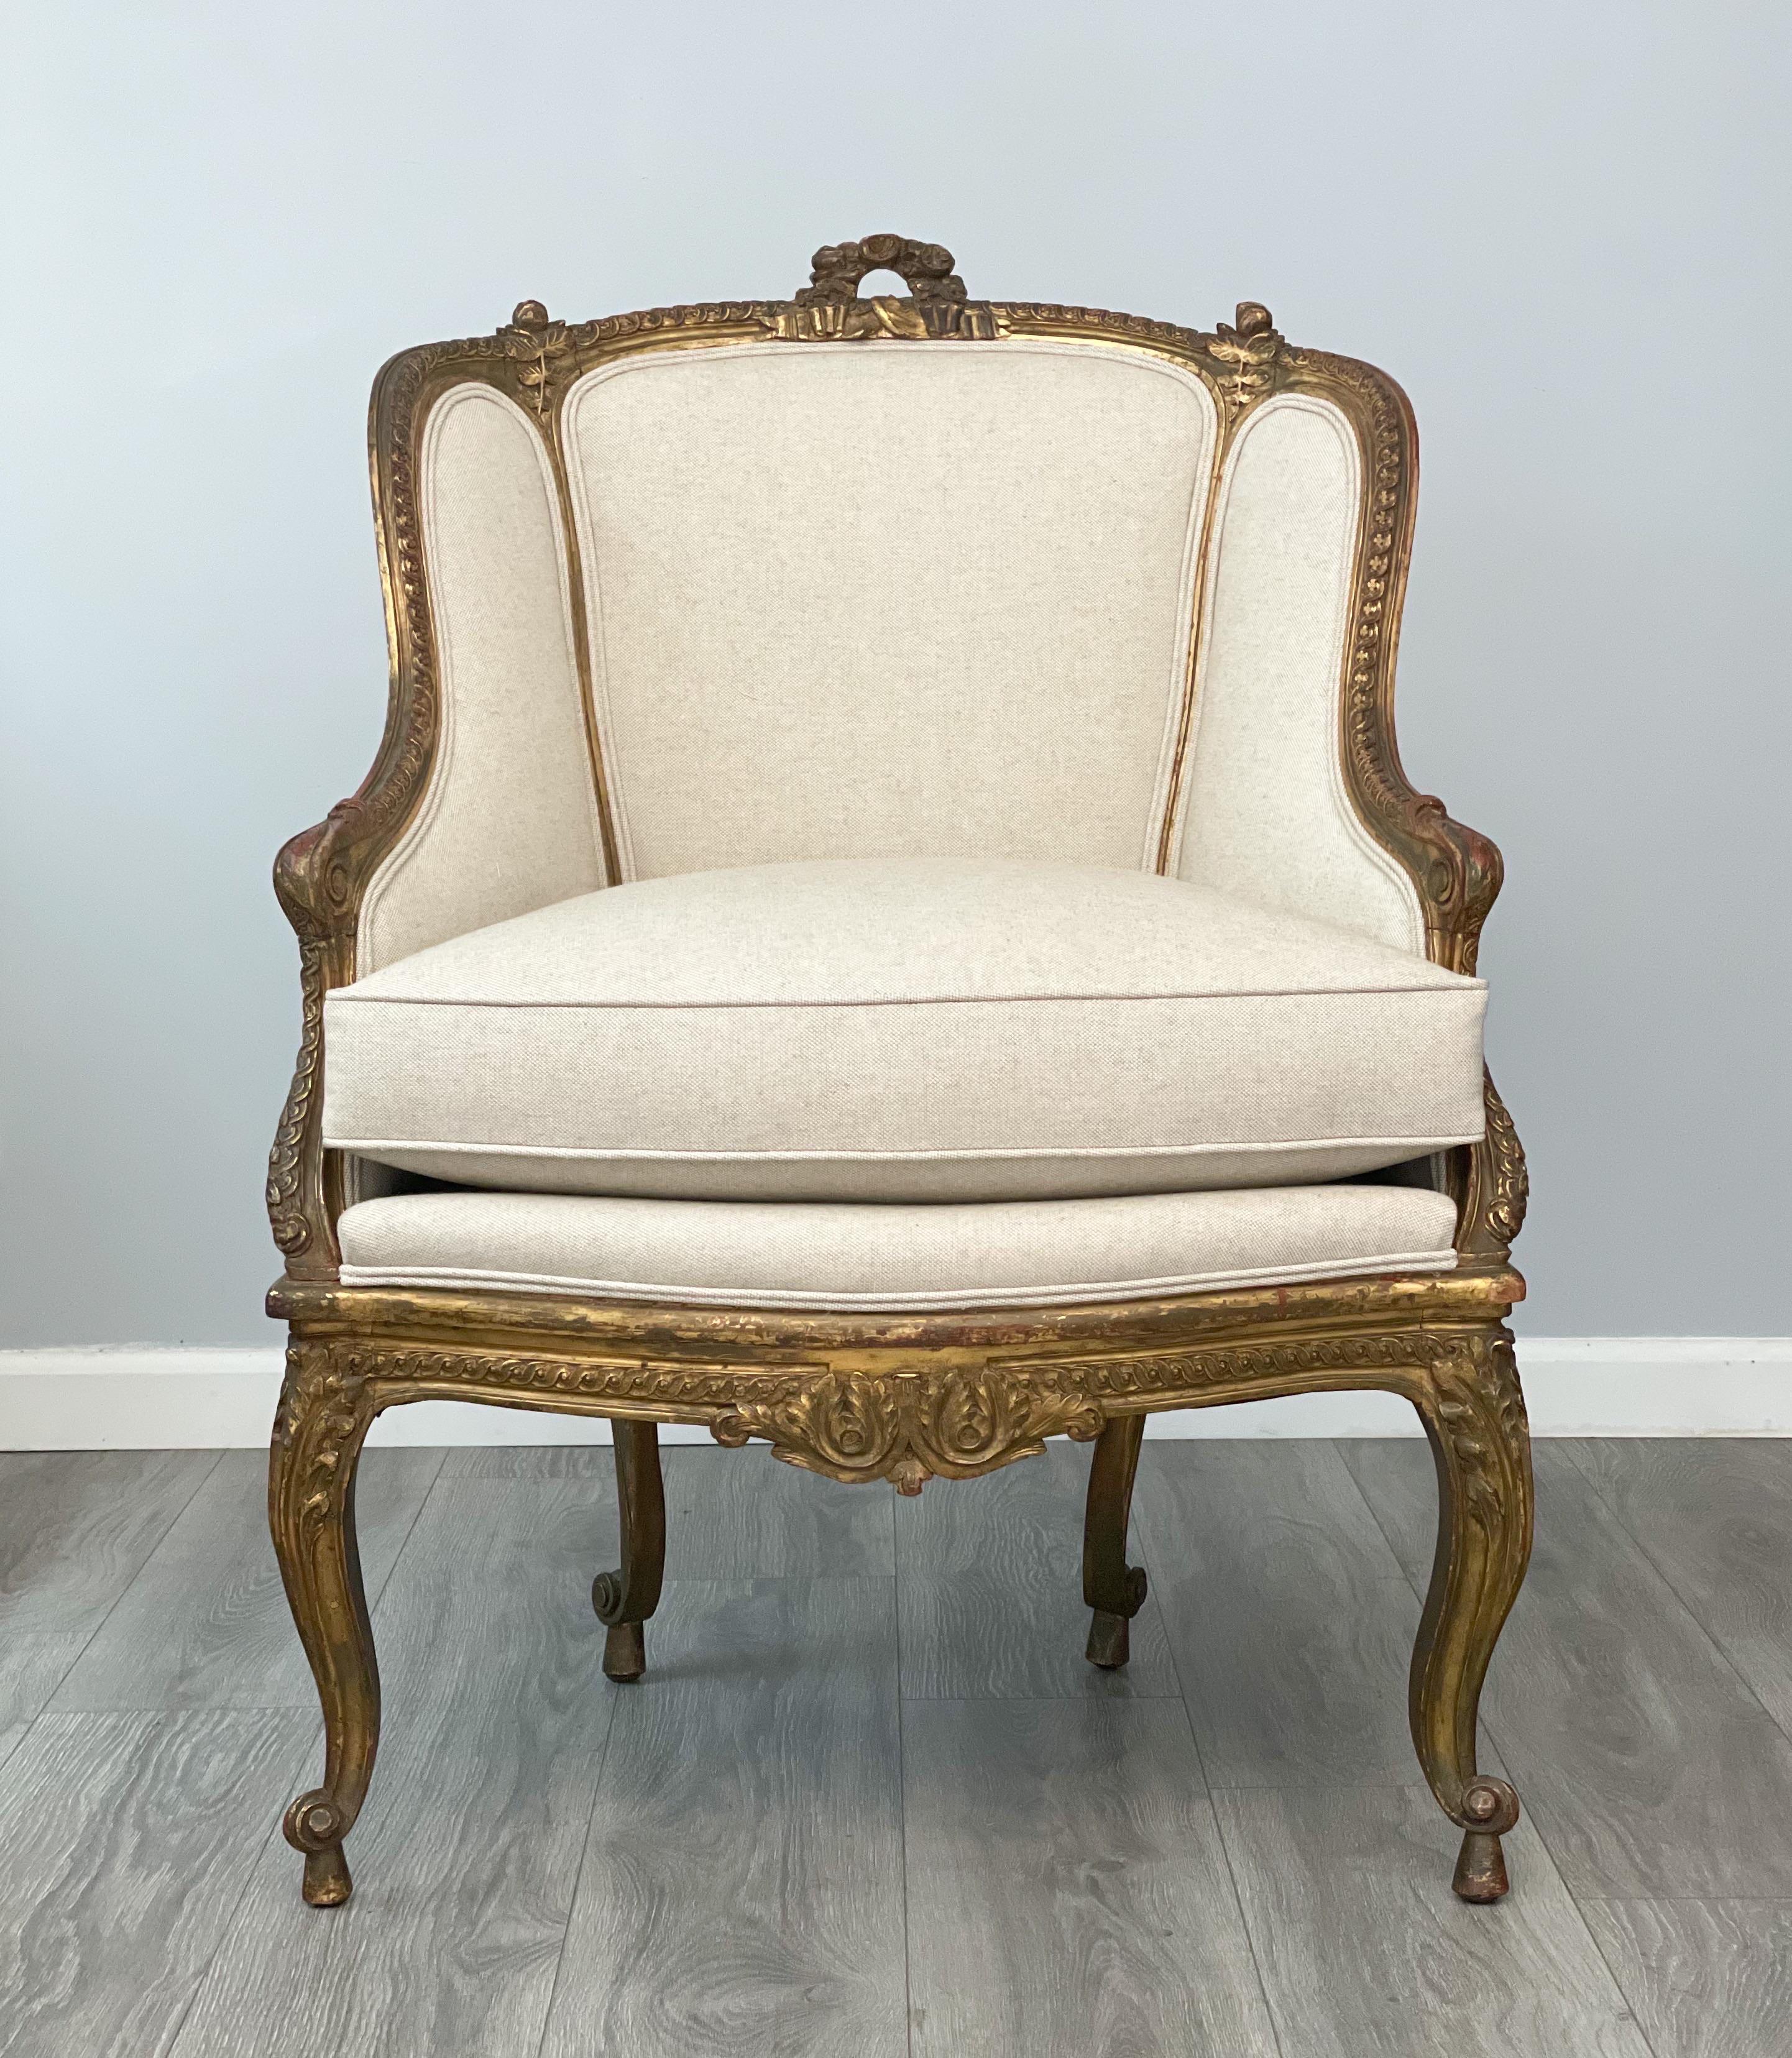 Beautiful, French 1920s bergere in the Louis XV style. 

The chair features a finely carved gilt-wood frame and new cotton linen canvas upholstery. Loose seat cushion. 

The chair is sturdy, sound and ready for many more years of use and